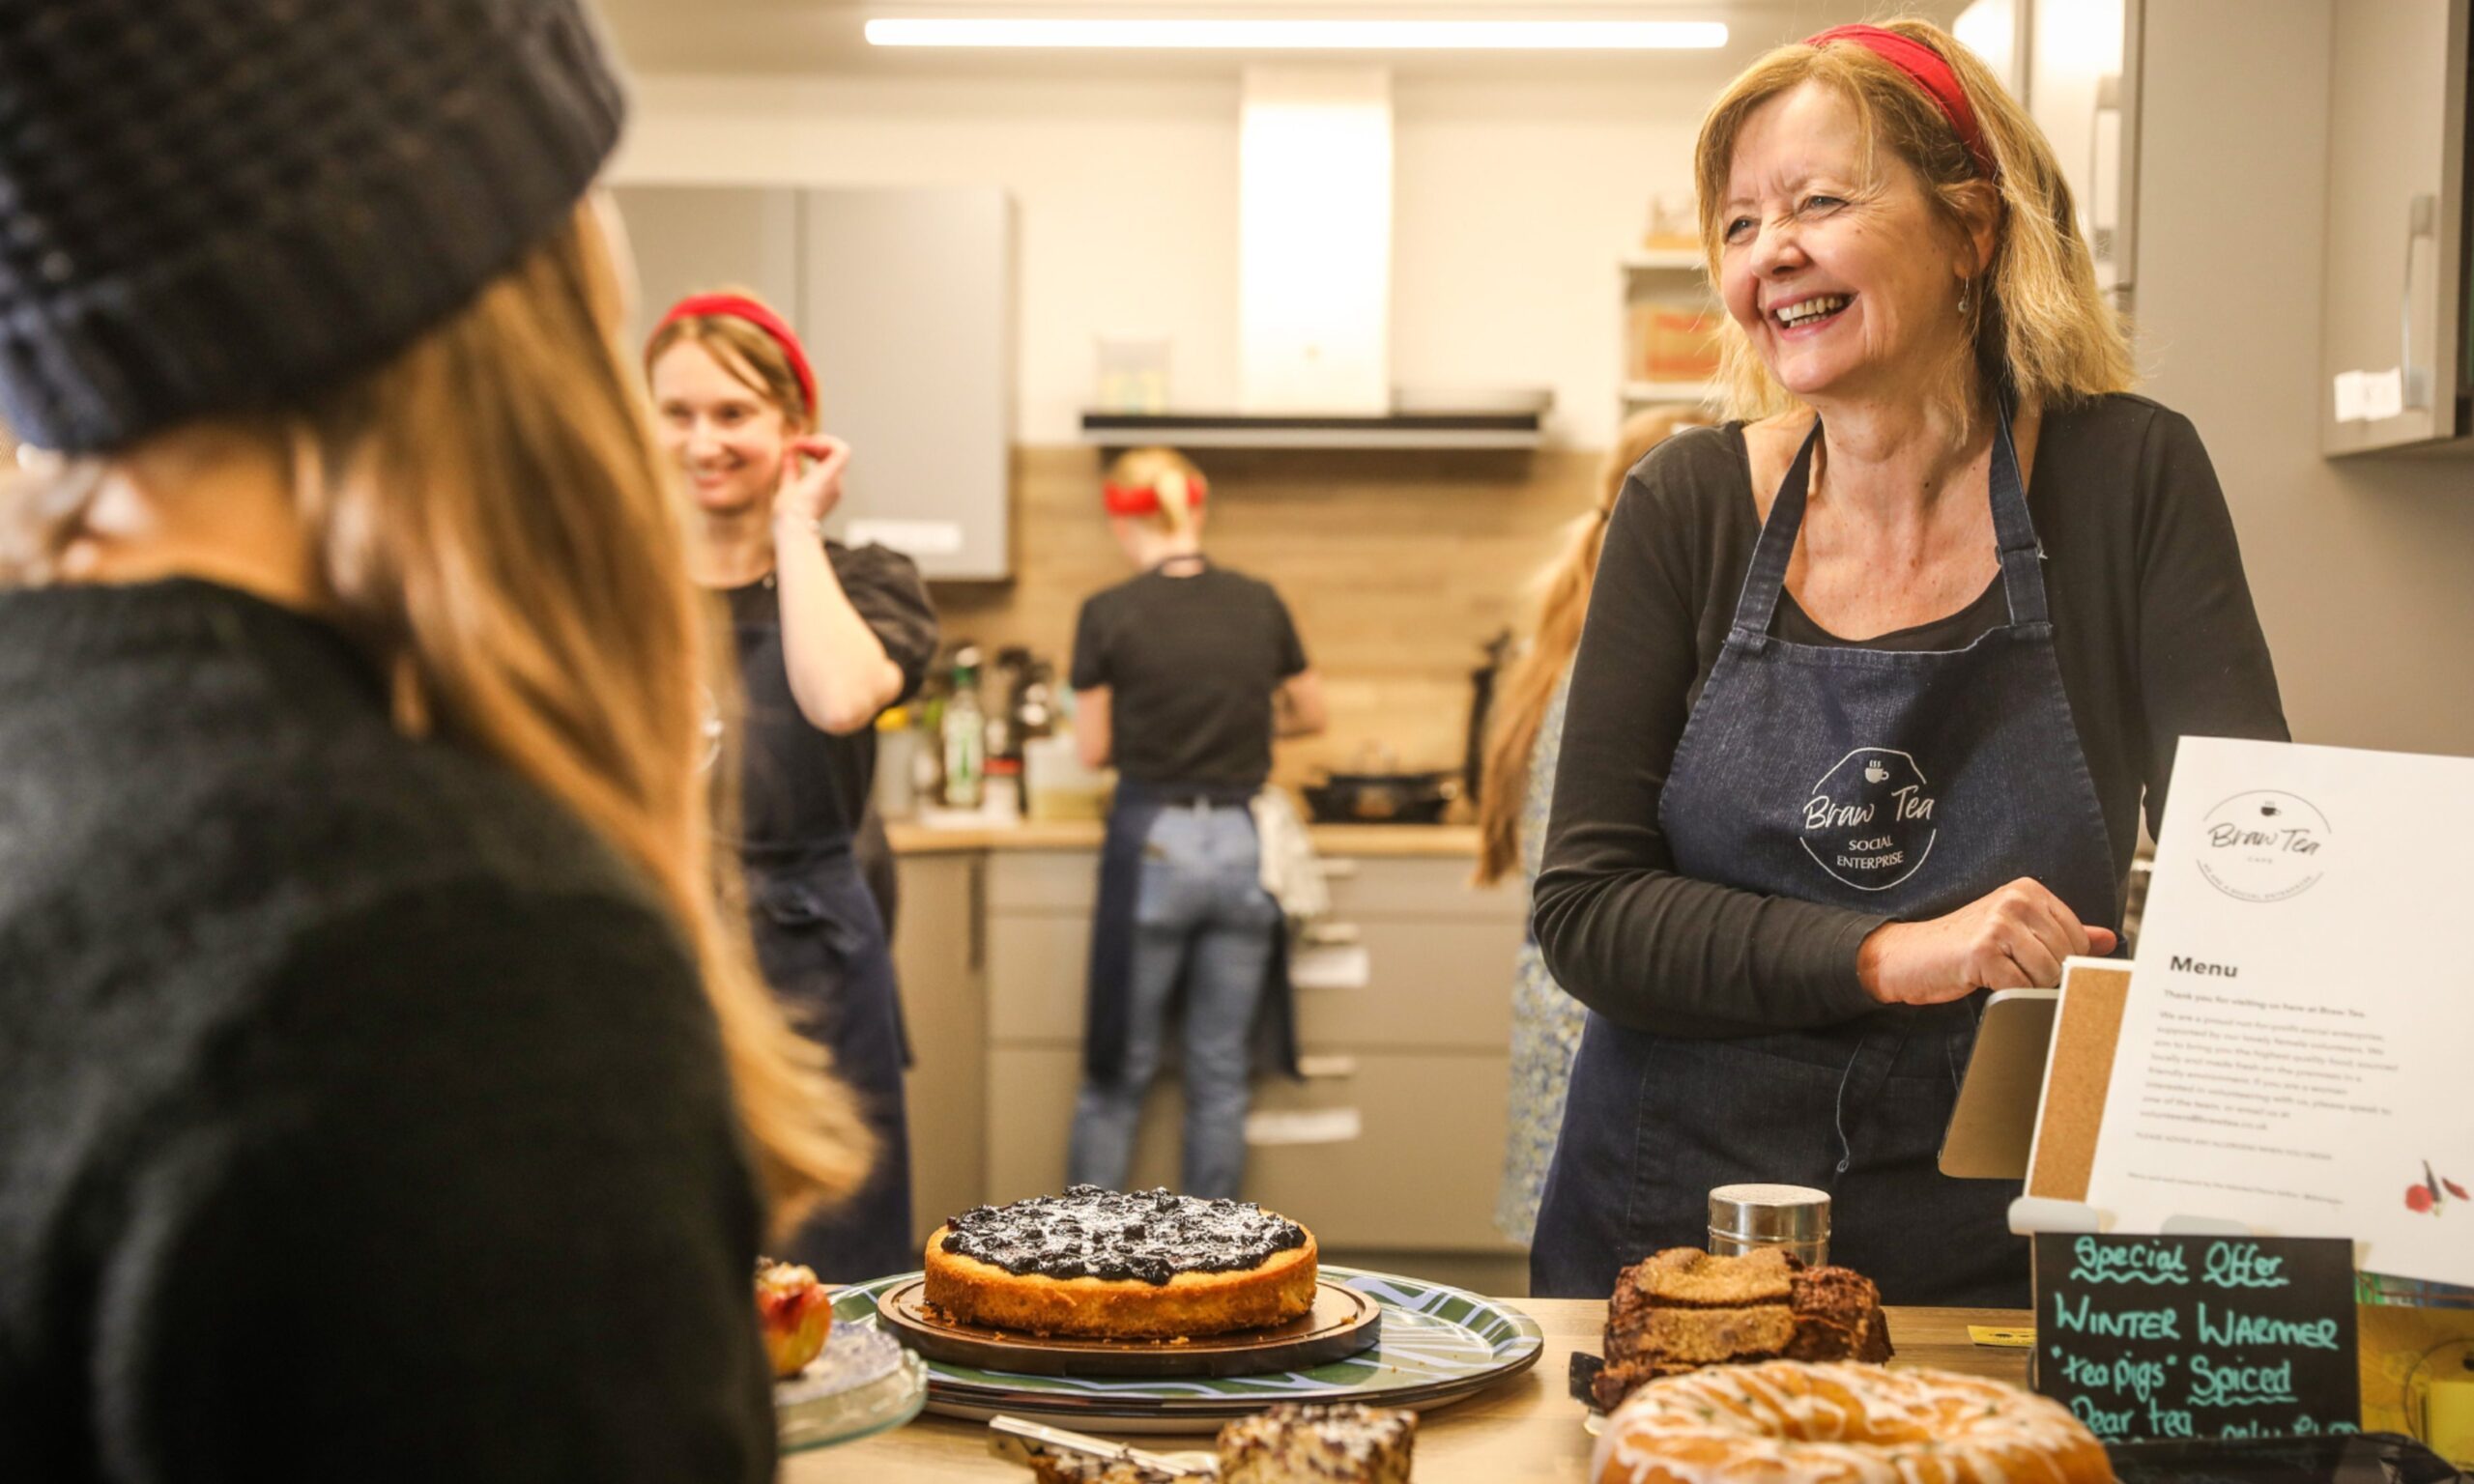 Jackie McKenzie has created a thriving, supportive safe space for women at her café Braw Tea in Broughty Ferry, Dundee. Image: Mhairi Edwards/DC Thomson